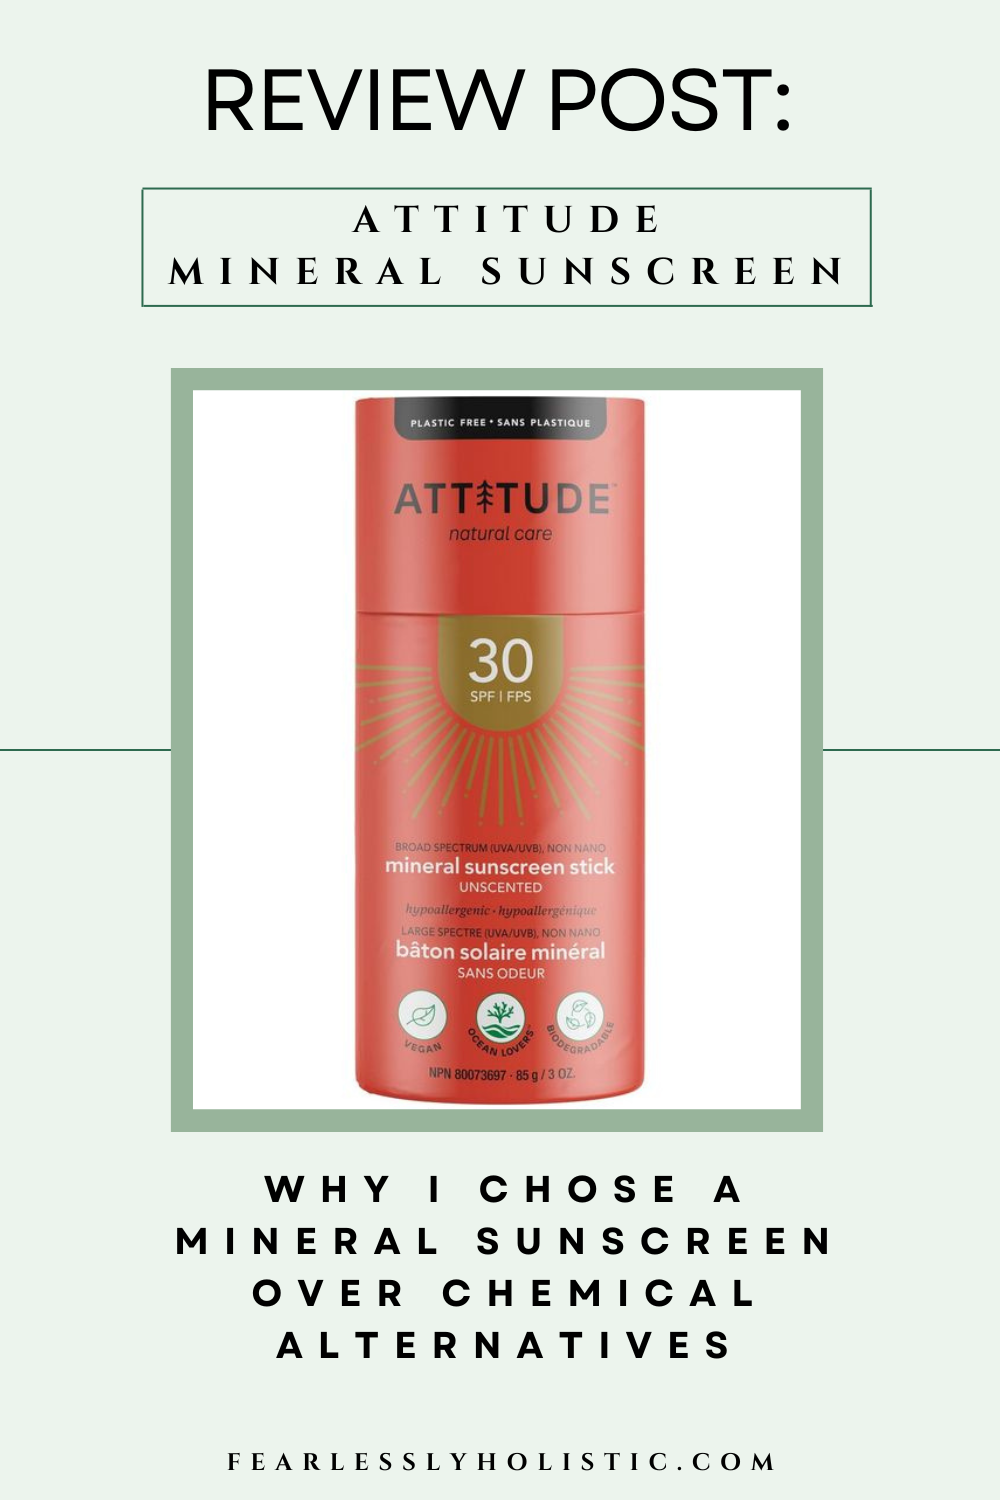 Attitude Mineral Sunscreen: Review Post